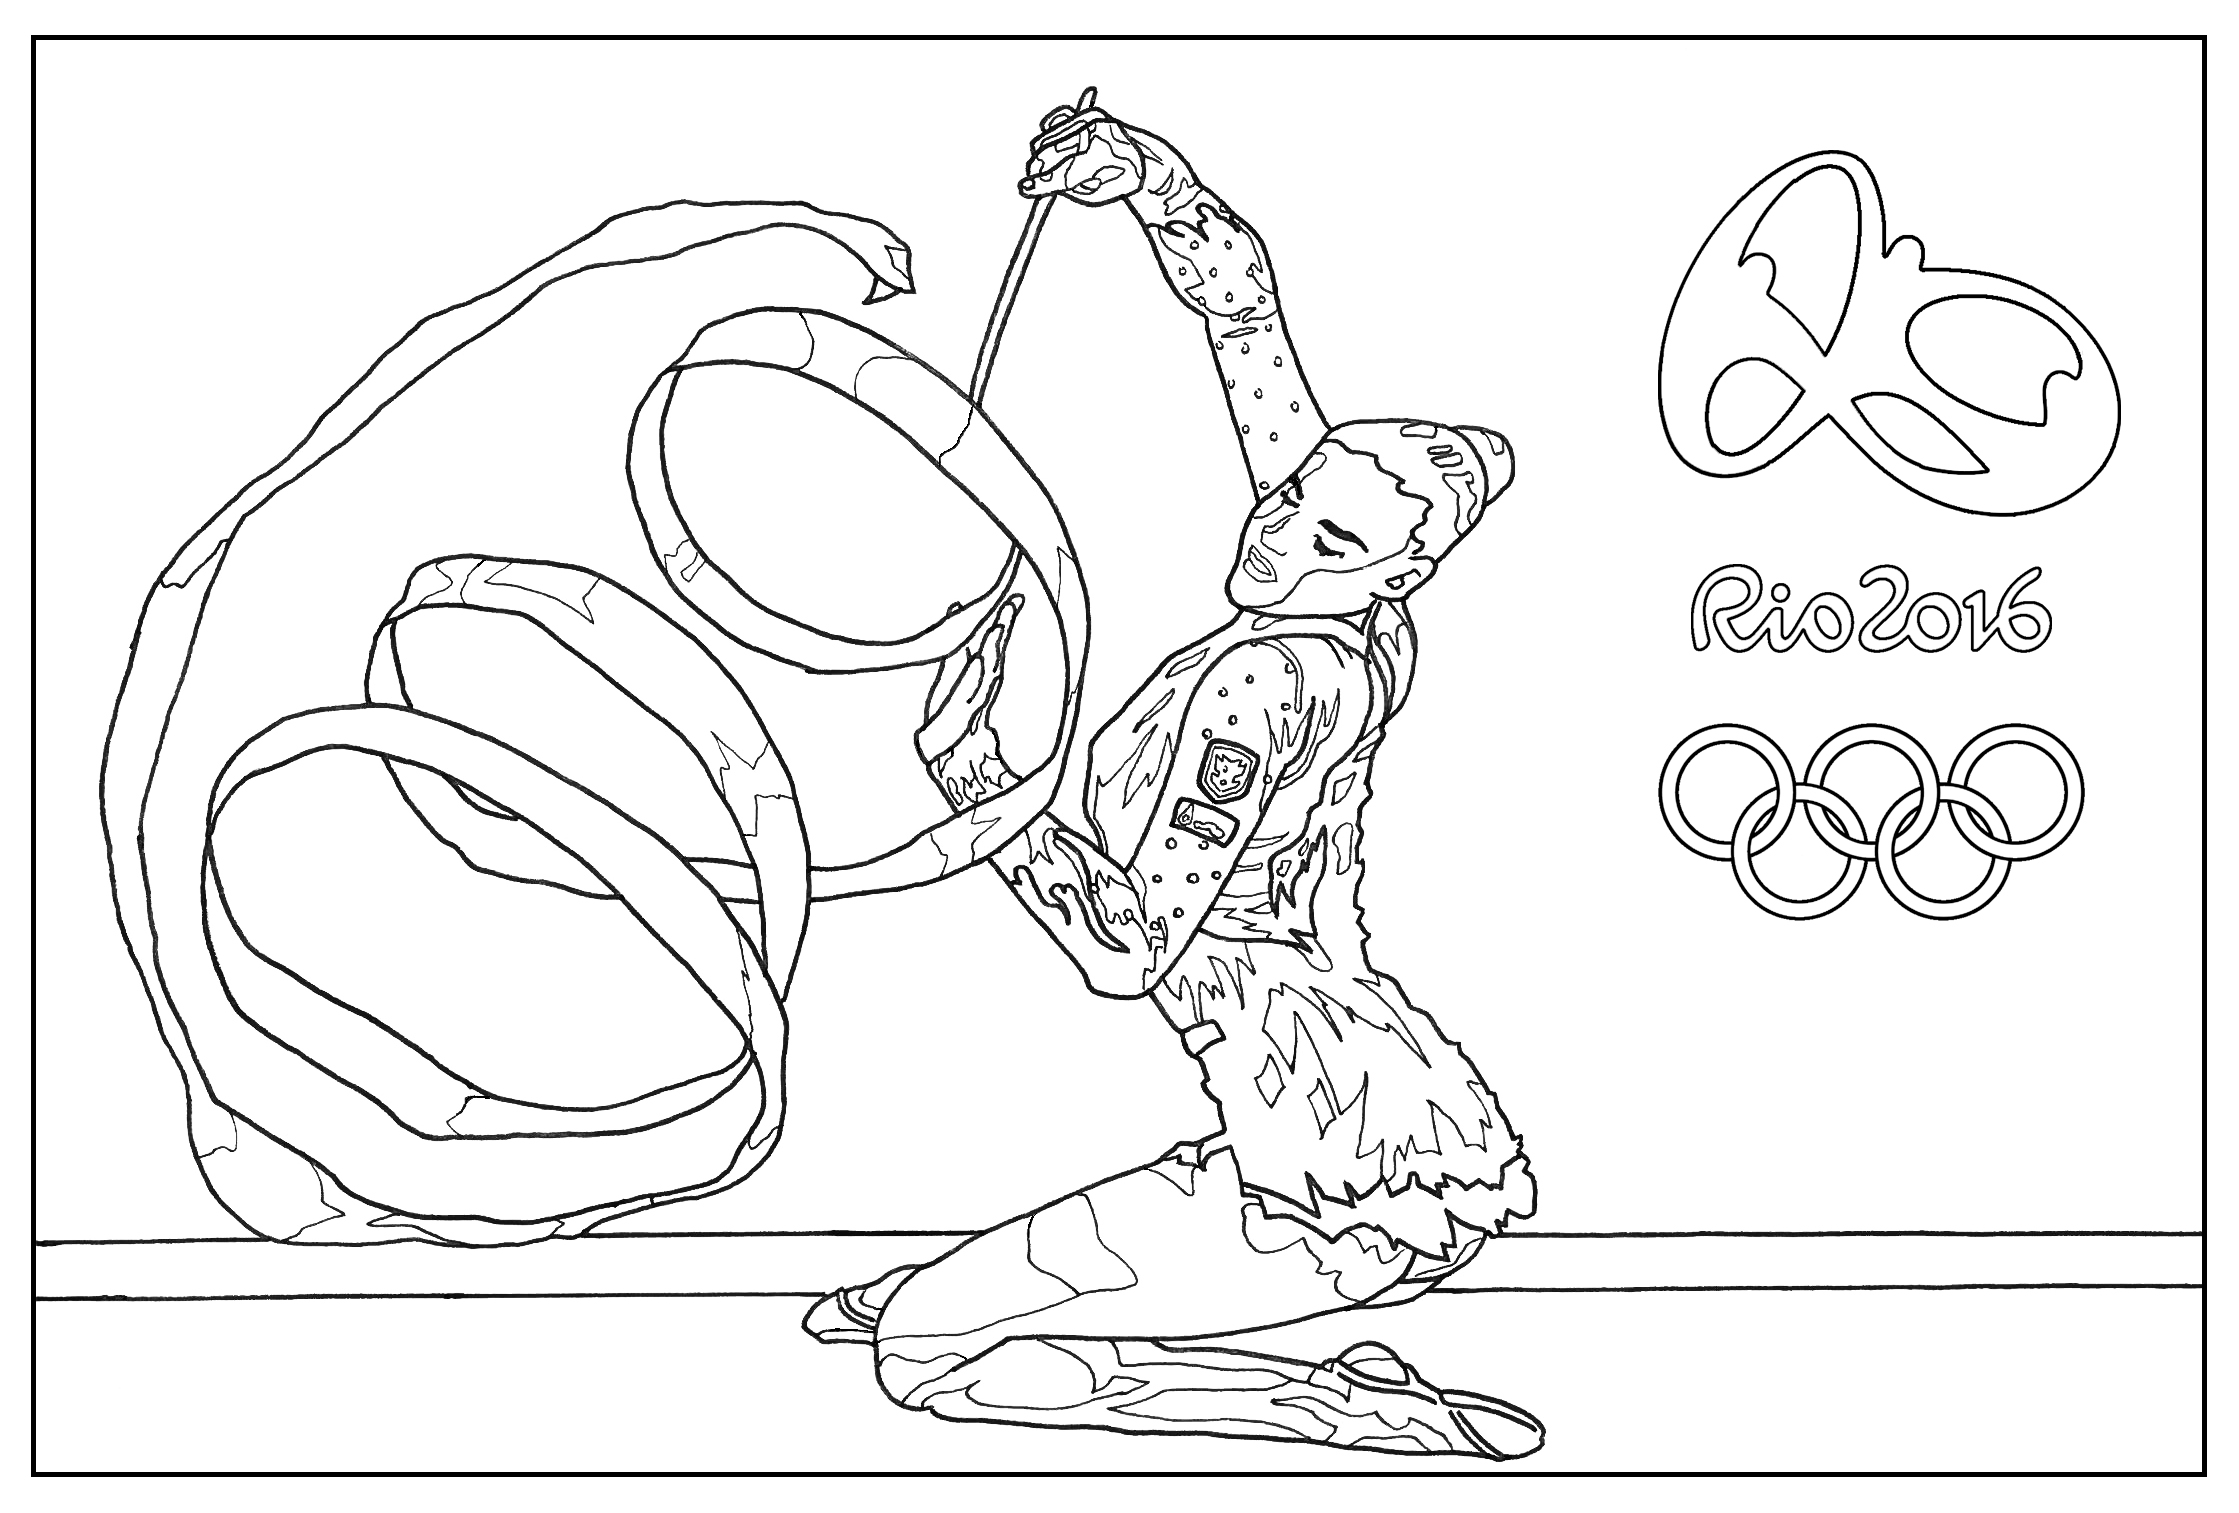 Coloring page for the 2016 Rio Olympic games : Gymnastic